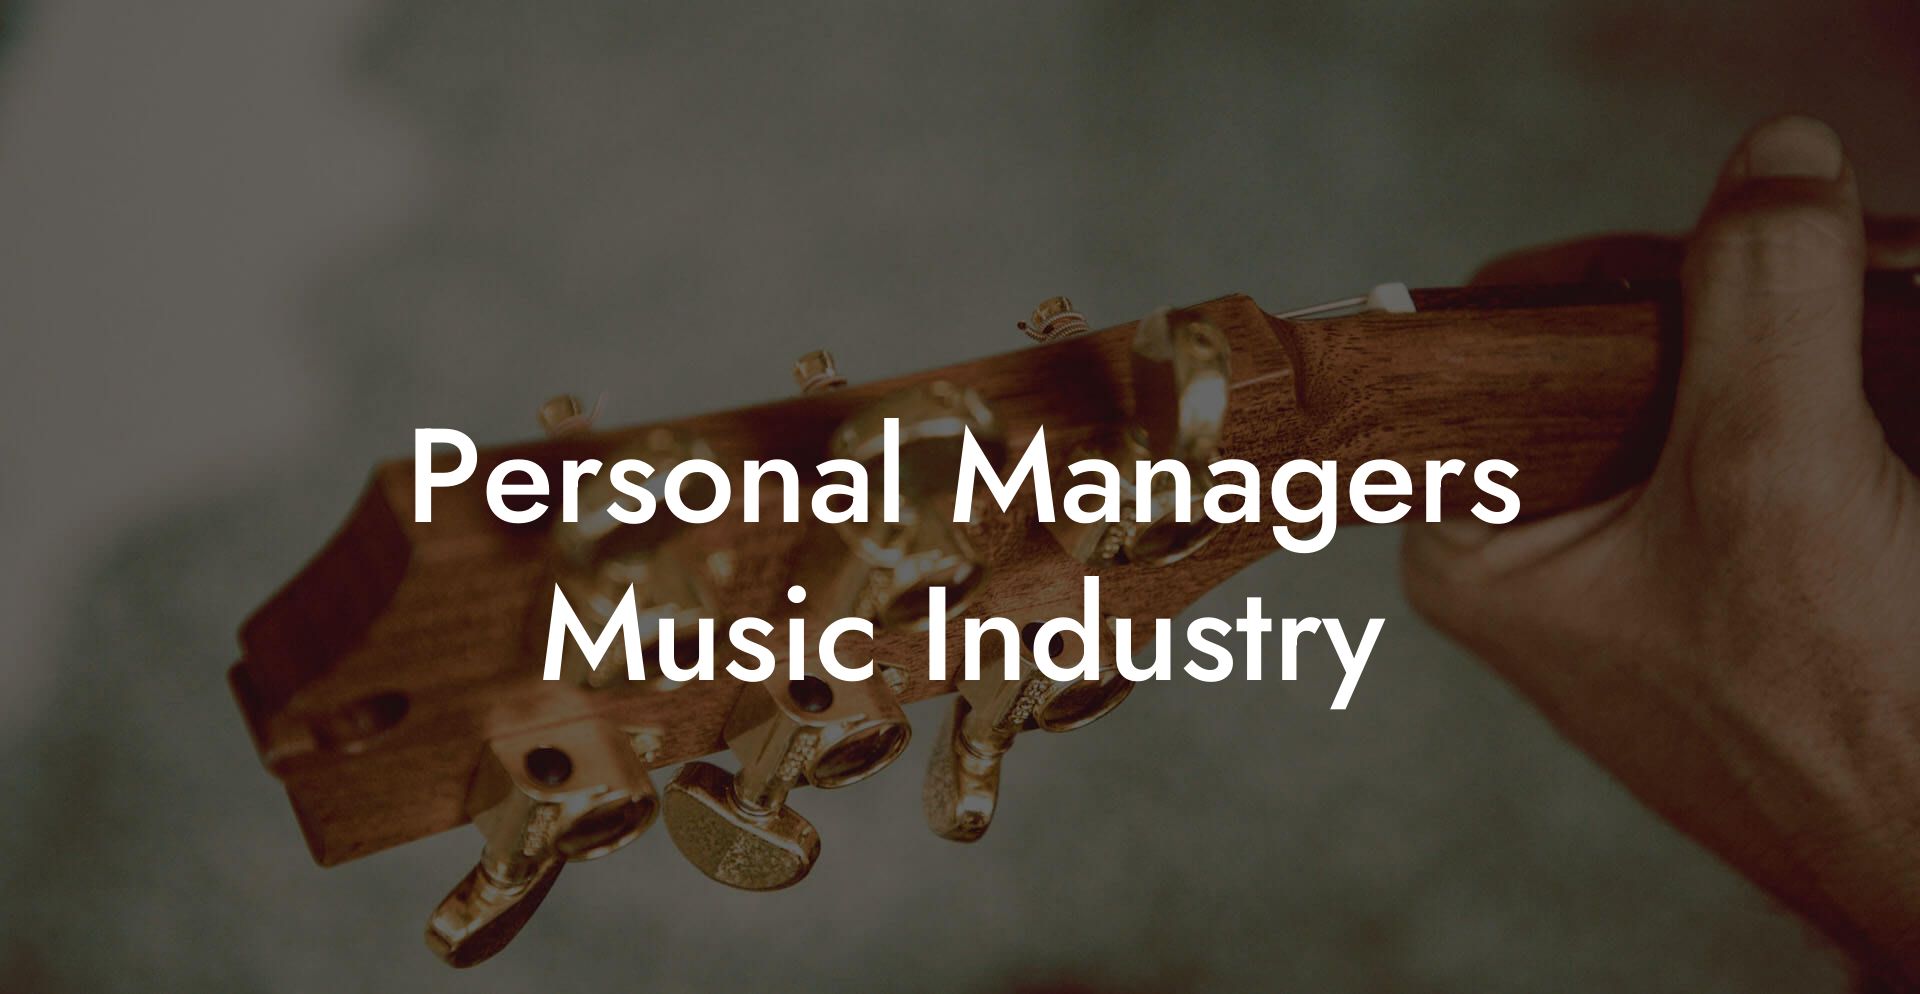 Personal Managers Music Industry